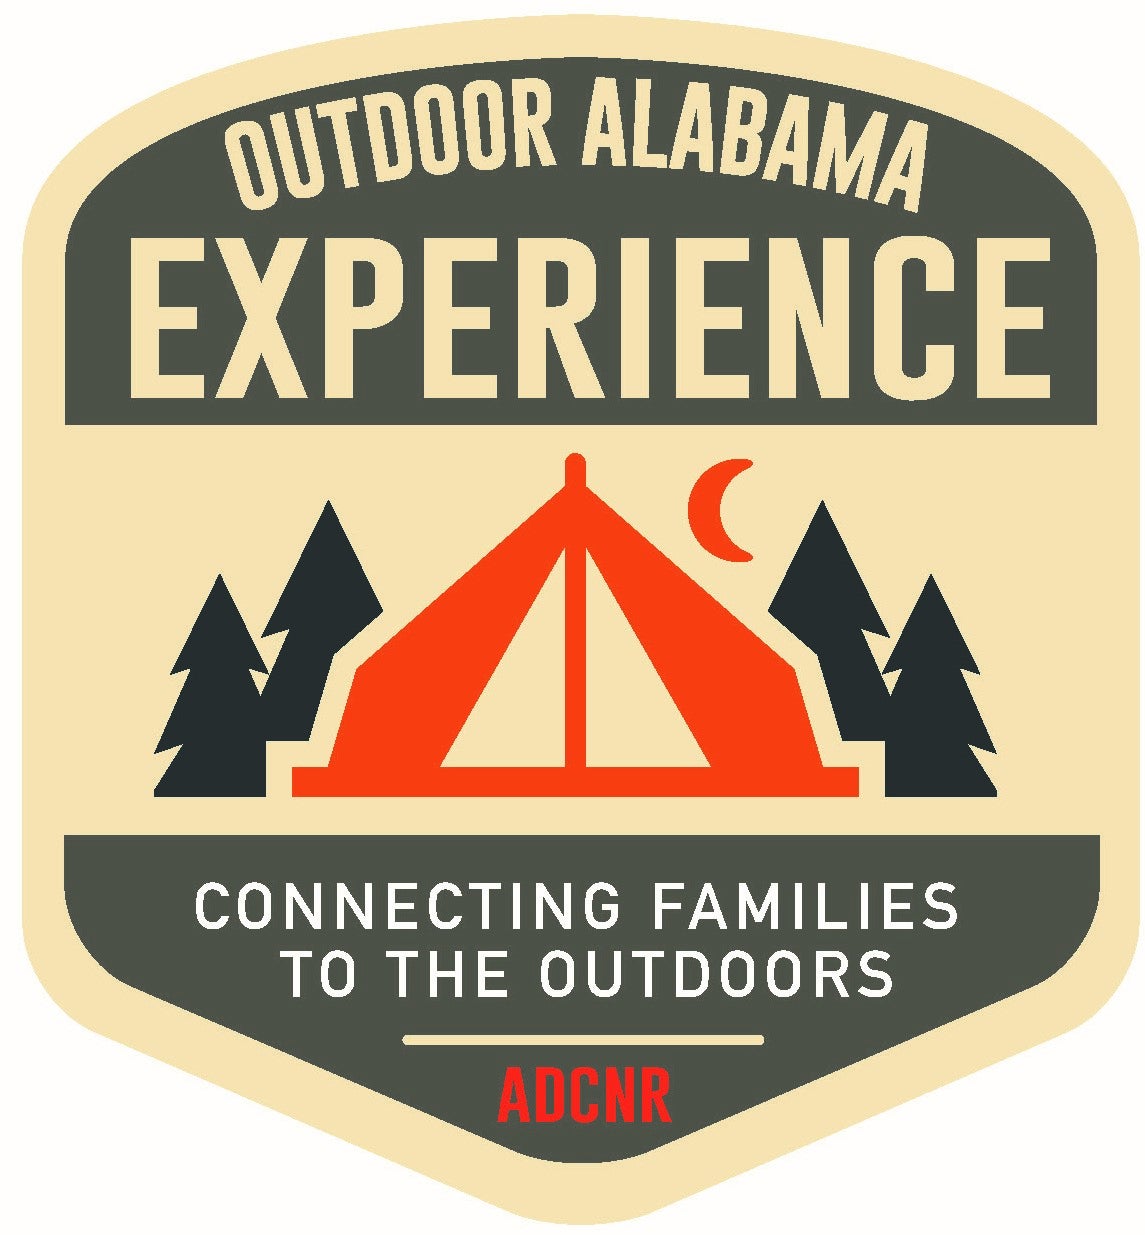 Outdoor Alabama Experience Coming to Oak Mountain in September